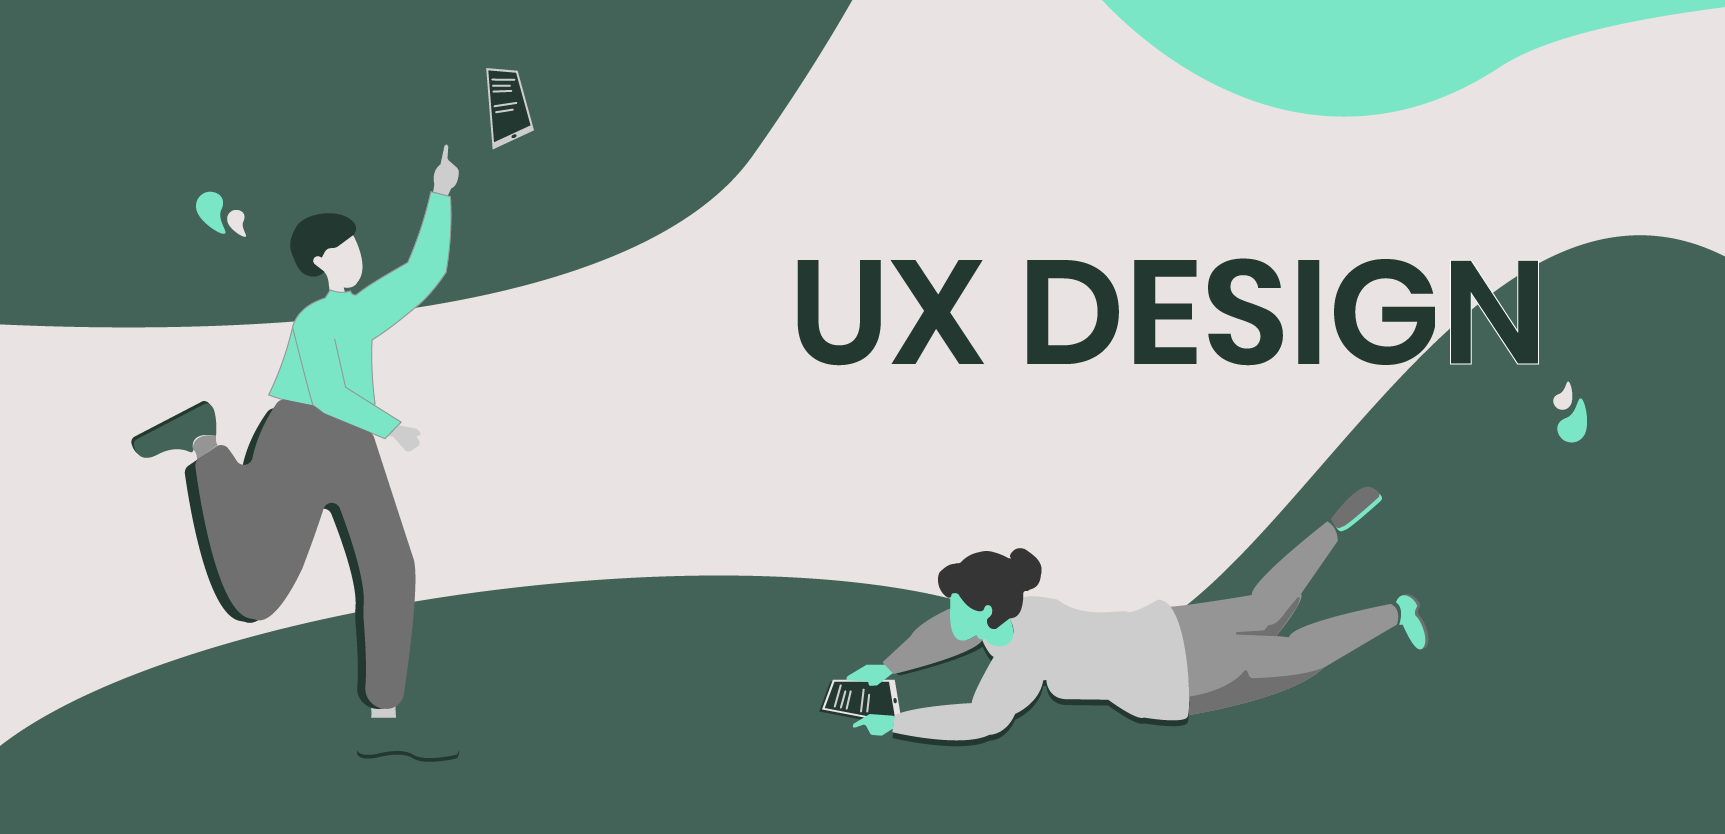 Why does UX design matter? And how does it affect your business?